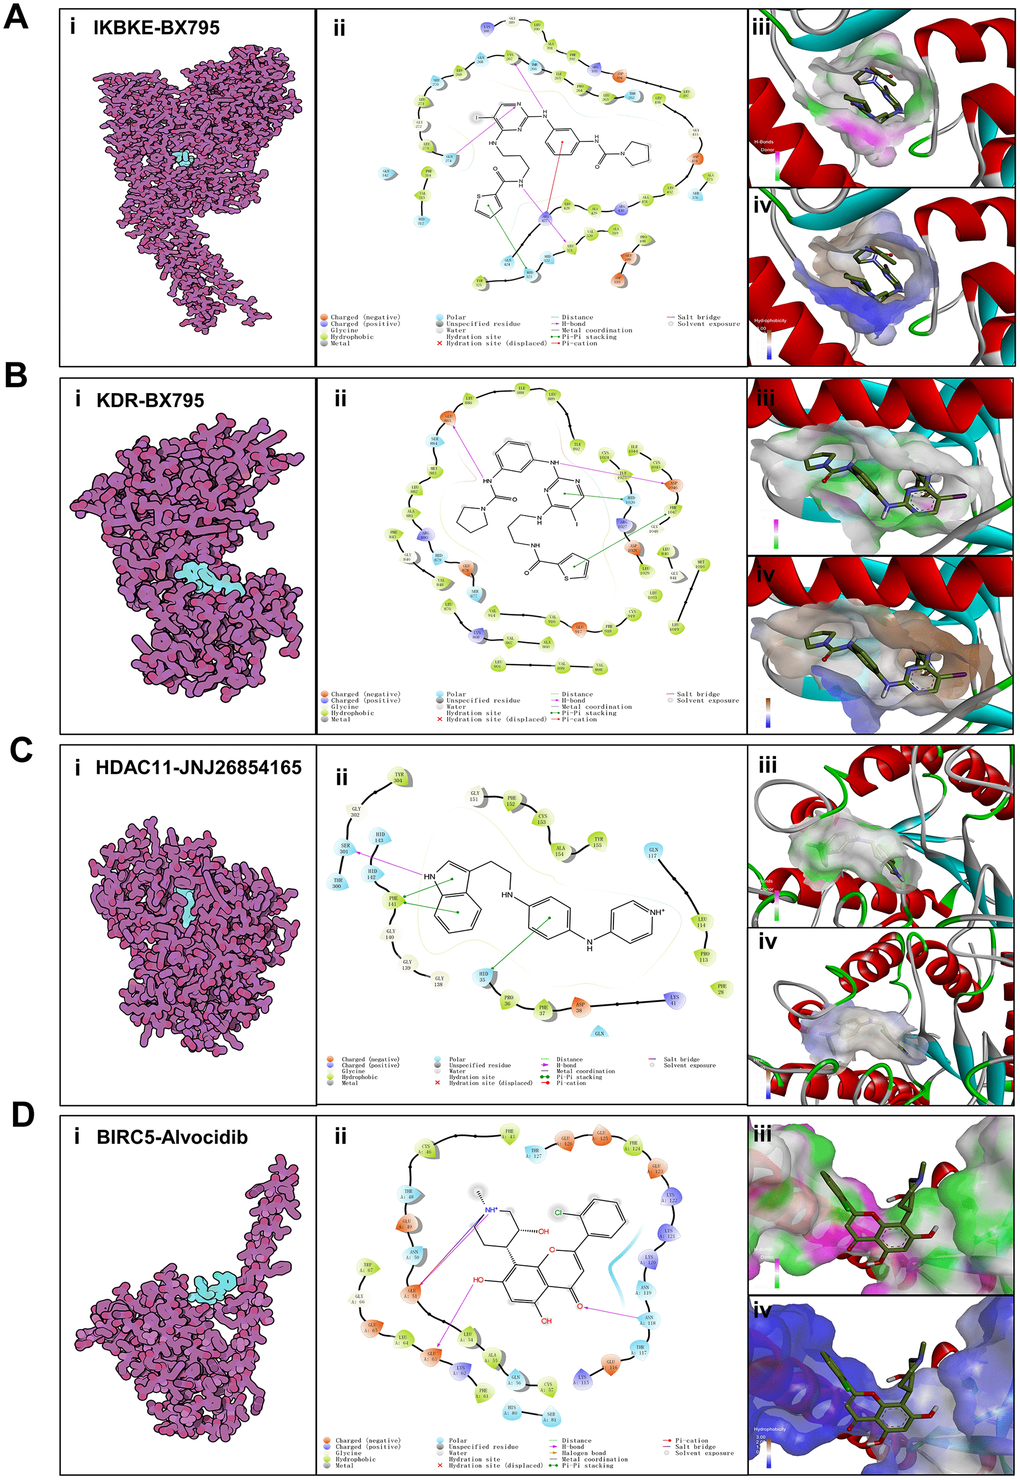 Binding mode of screened drugs to their targets by molecular docking. (A) Binding mode of BX795 to IKBKE. (B) Binding mode of BX795 to KDR. (C) Binding mode of JNJ26854165 to HDAC11. (D) Binding mode of Alvocidib to BIRC5. (i), Cartoon representation, overlay of the crystal structures of small molecule compounds and their targets were illustrated by Molecule of the Month feature. (ii), 2D interactions of compounds and their targets. (iii, iv) Three-dimensional structures of the binding pockets were showed by PyMOL software. (iii), Coloring is from carmine (for strong H-bonds) to green (for poor H-bonds). (iv), Coloring is from magenta (for strong hydrophobic regions) to blue (for poor hydrophobic regions).